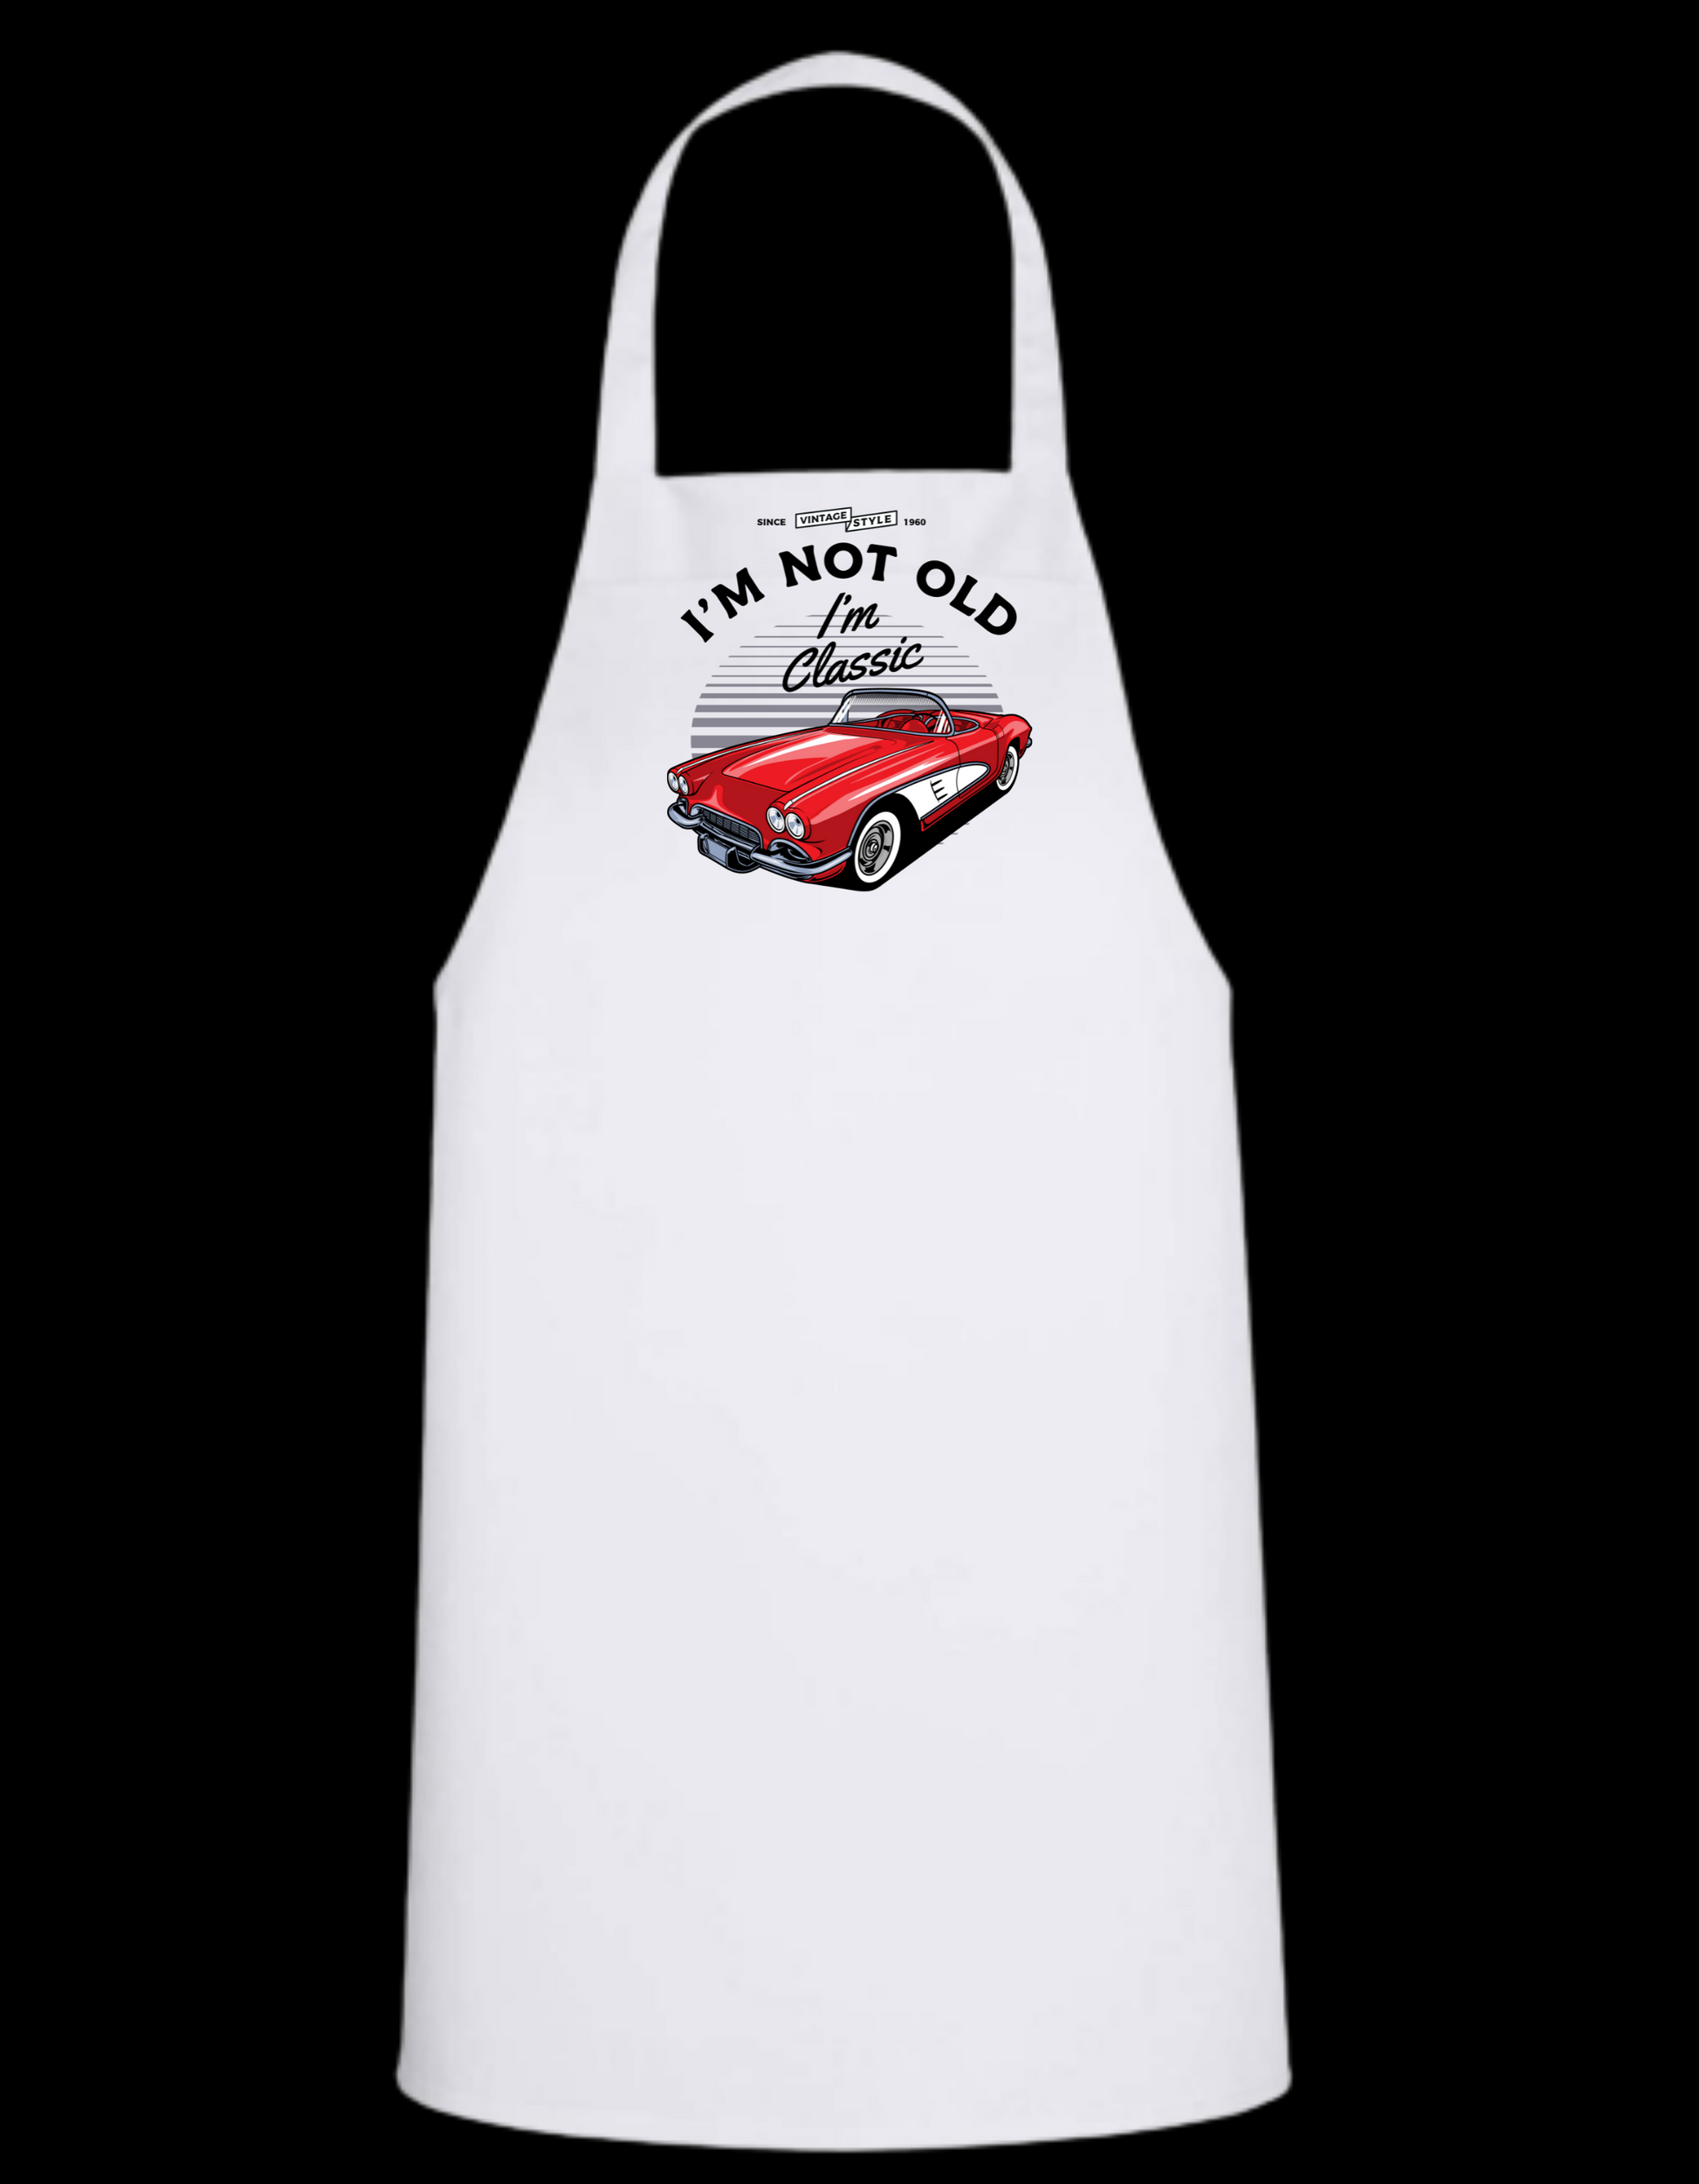 I'm Not Old, I'm Classic - Corvette - White Apron with Color design Great Gift - Mister Snarky's